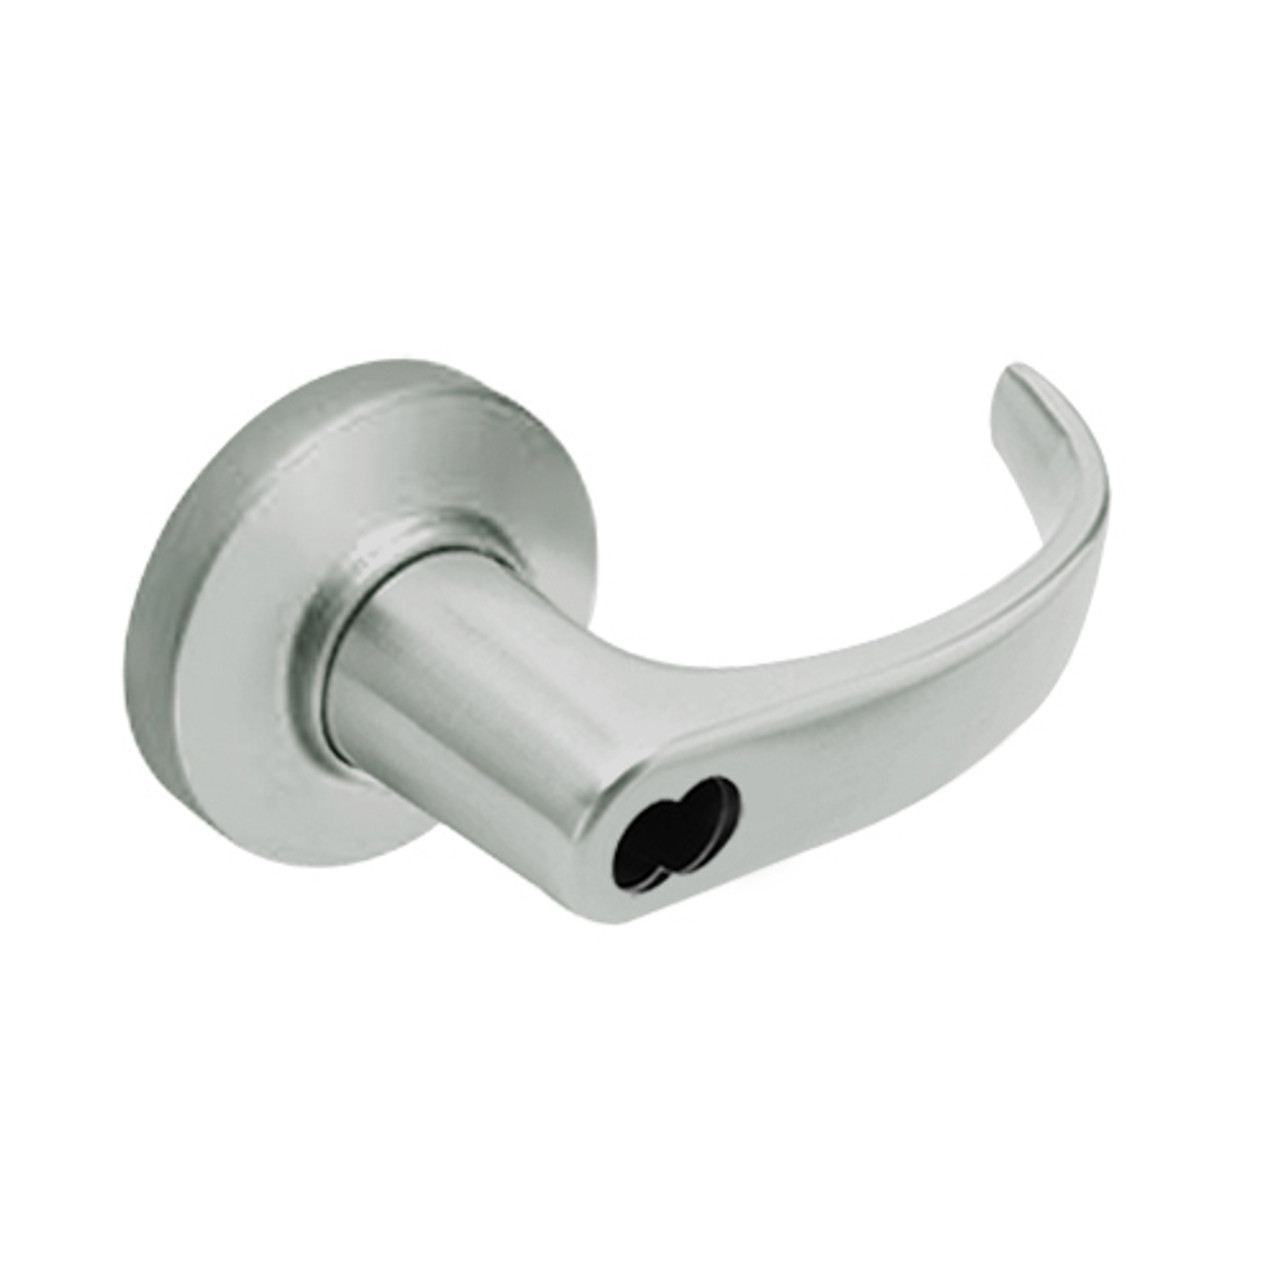 9K37A14CS3619 Best 9K Series Dormitory or Storeroom Cylindrical Lever Locks with Curved with Return Lever Design Accept 7 Pin Best Core in Satin Nickel